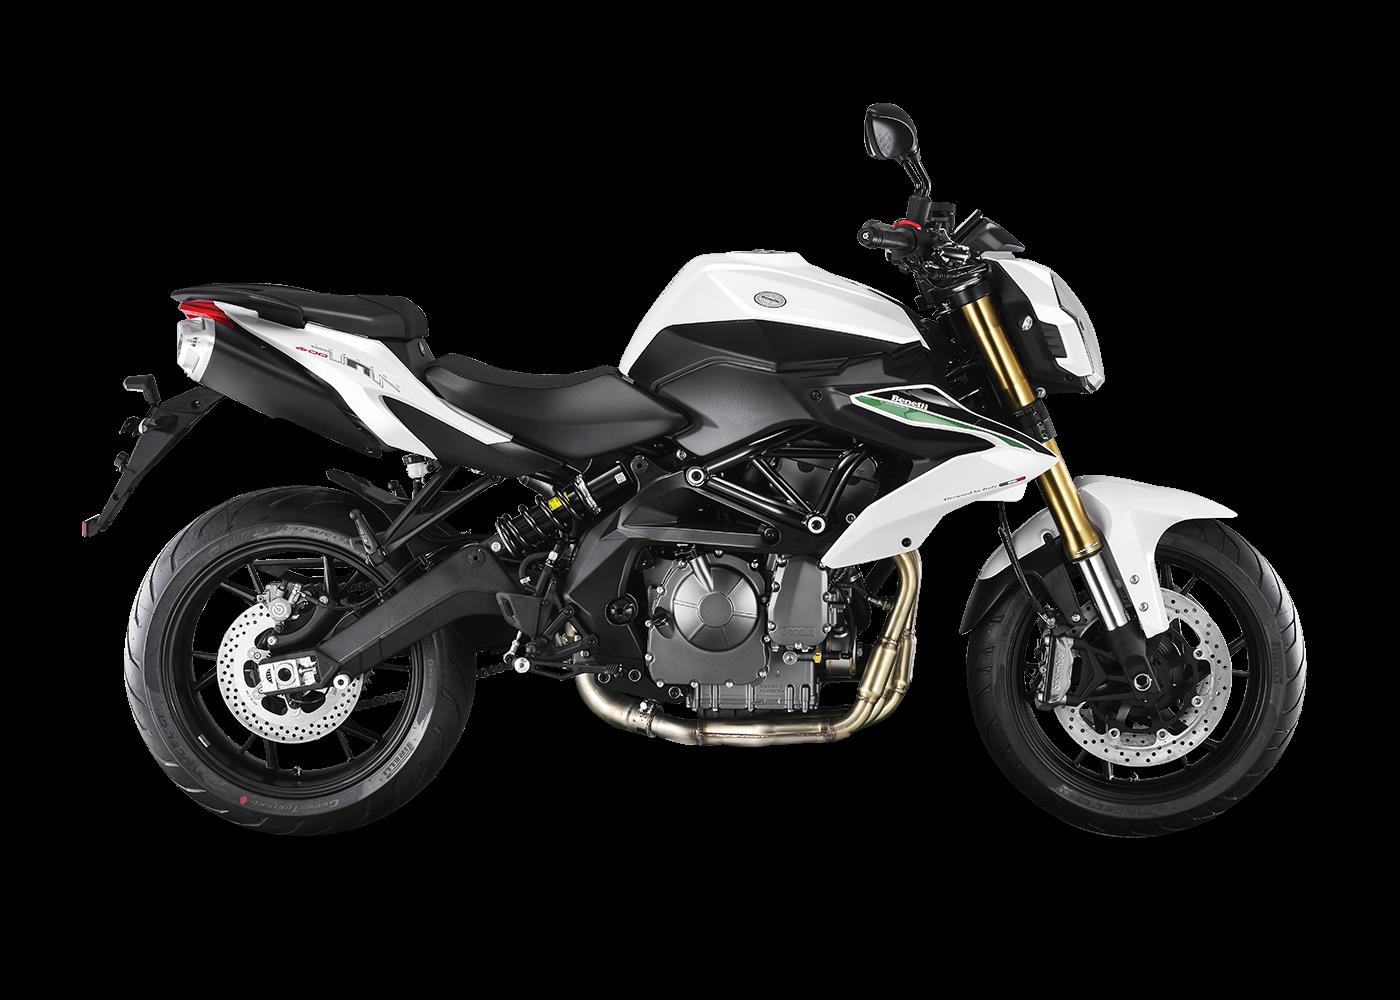 Whats new in the Benelli TNT 600i  Rediffcom Get Ahead